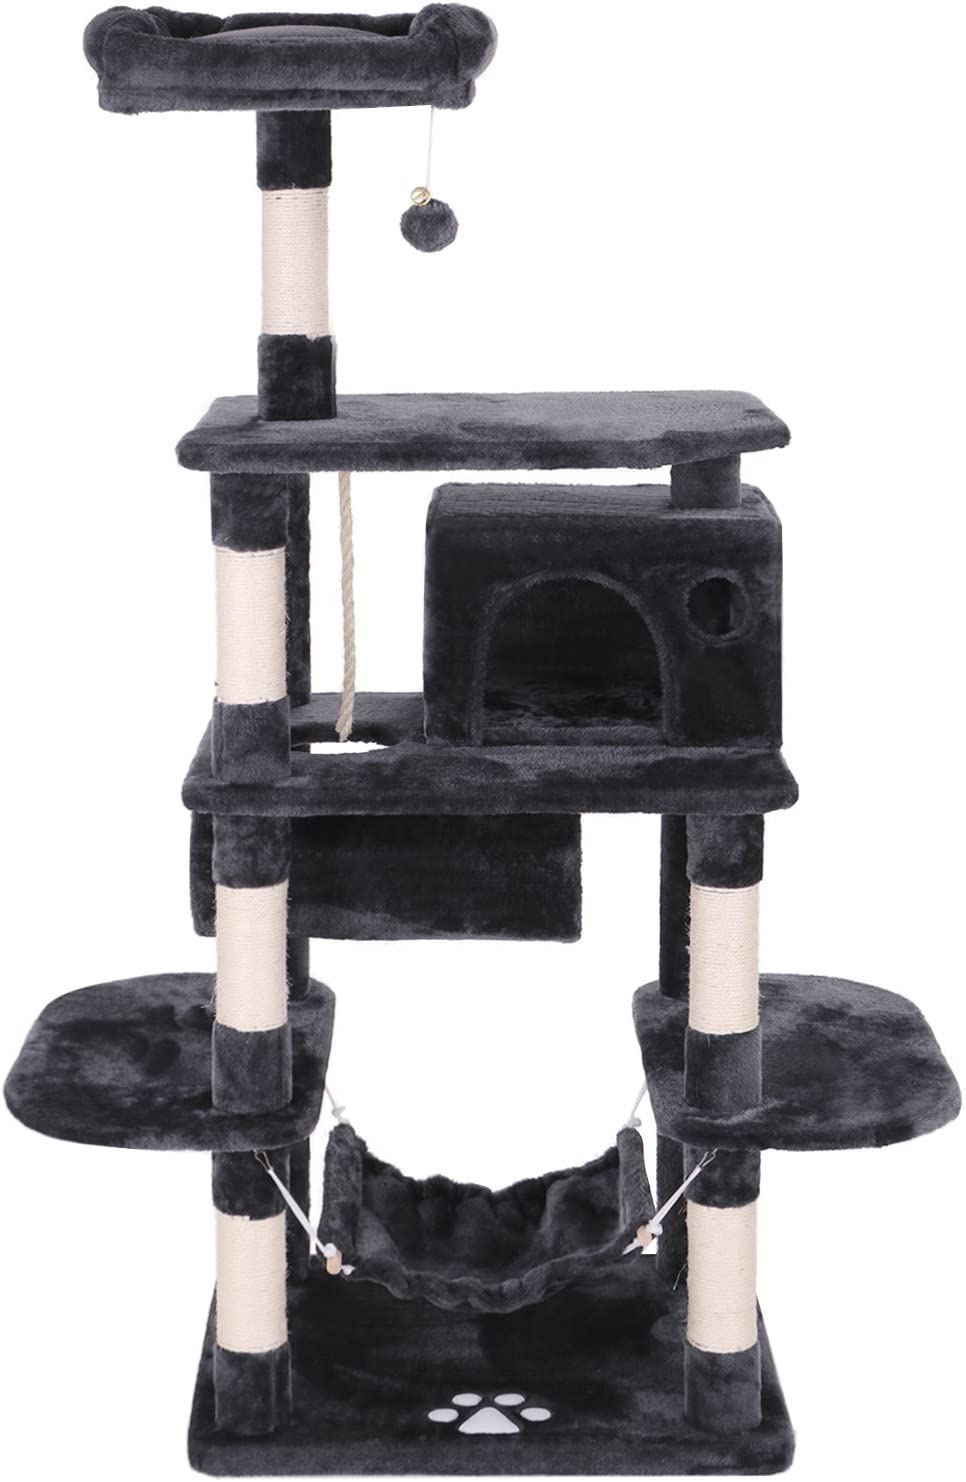 BEWISHOME Cat Tree Condo Furniture Kitten Activity Tower Pet Kitty Play House with Scratching Posts Perch Hammock Tunnel MMJ02